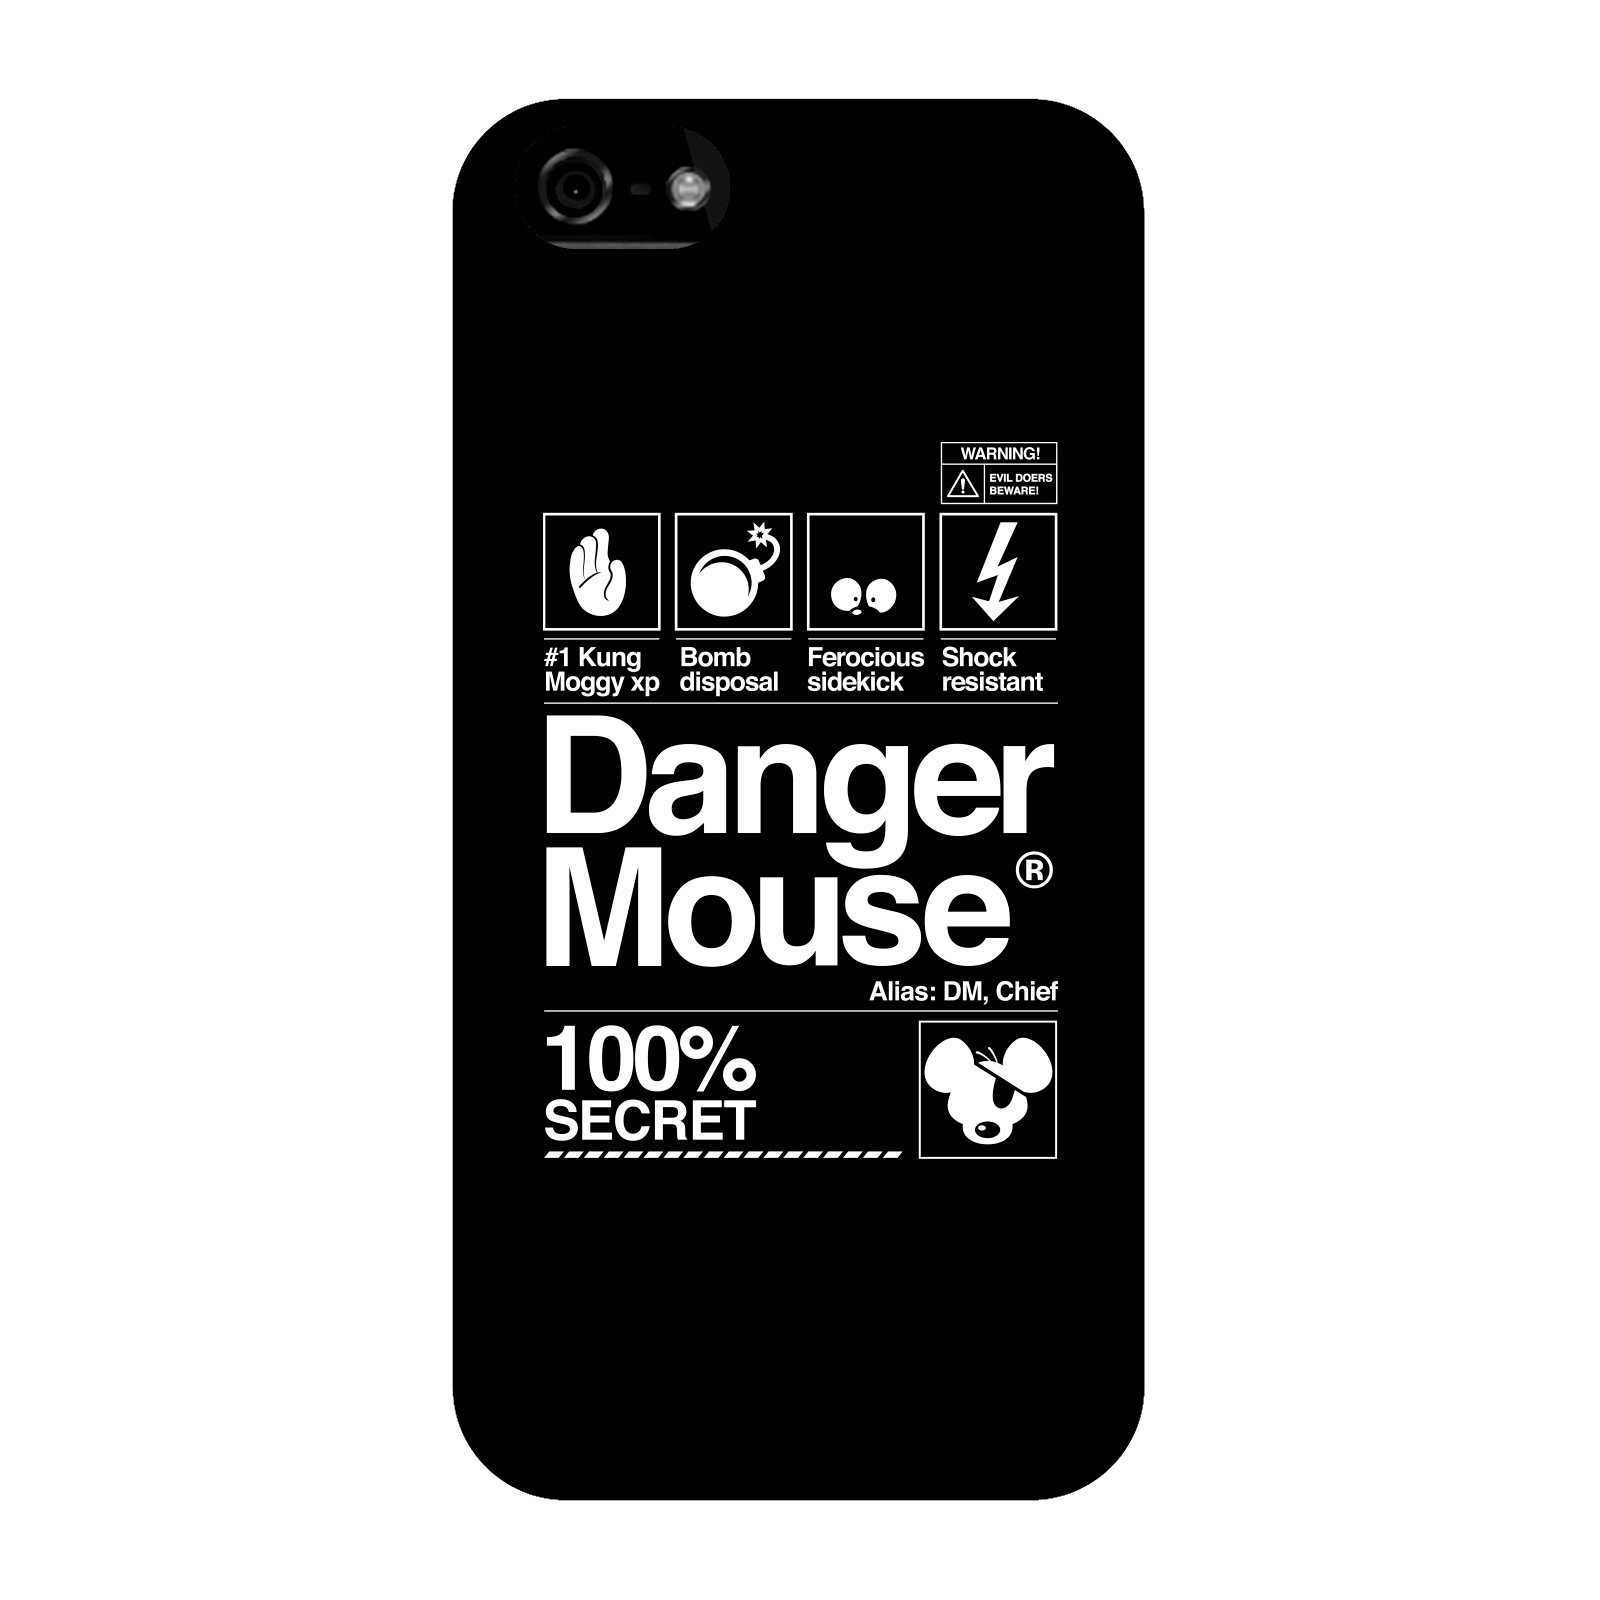 Danger Mouse 100% Secret Phone Case for iPhone and Android - iPhone 5C - Snap Case - Gloss